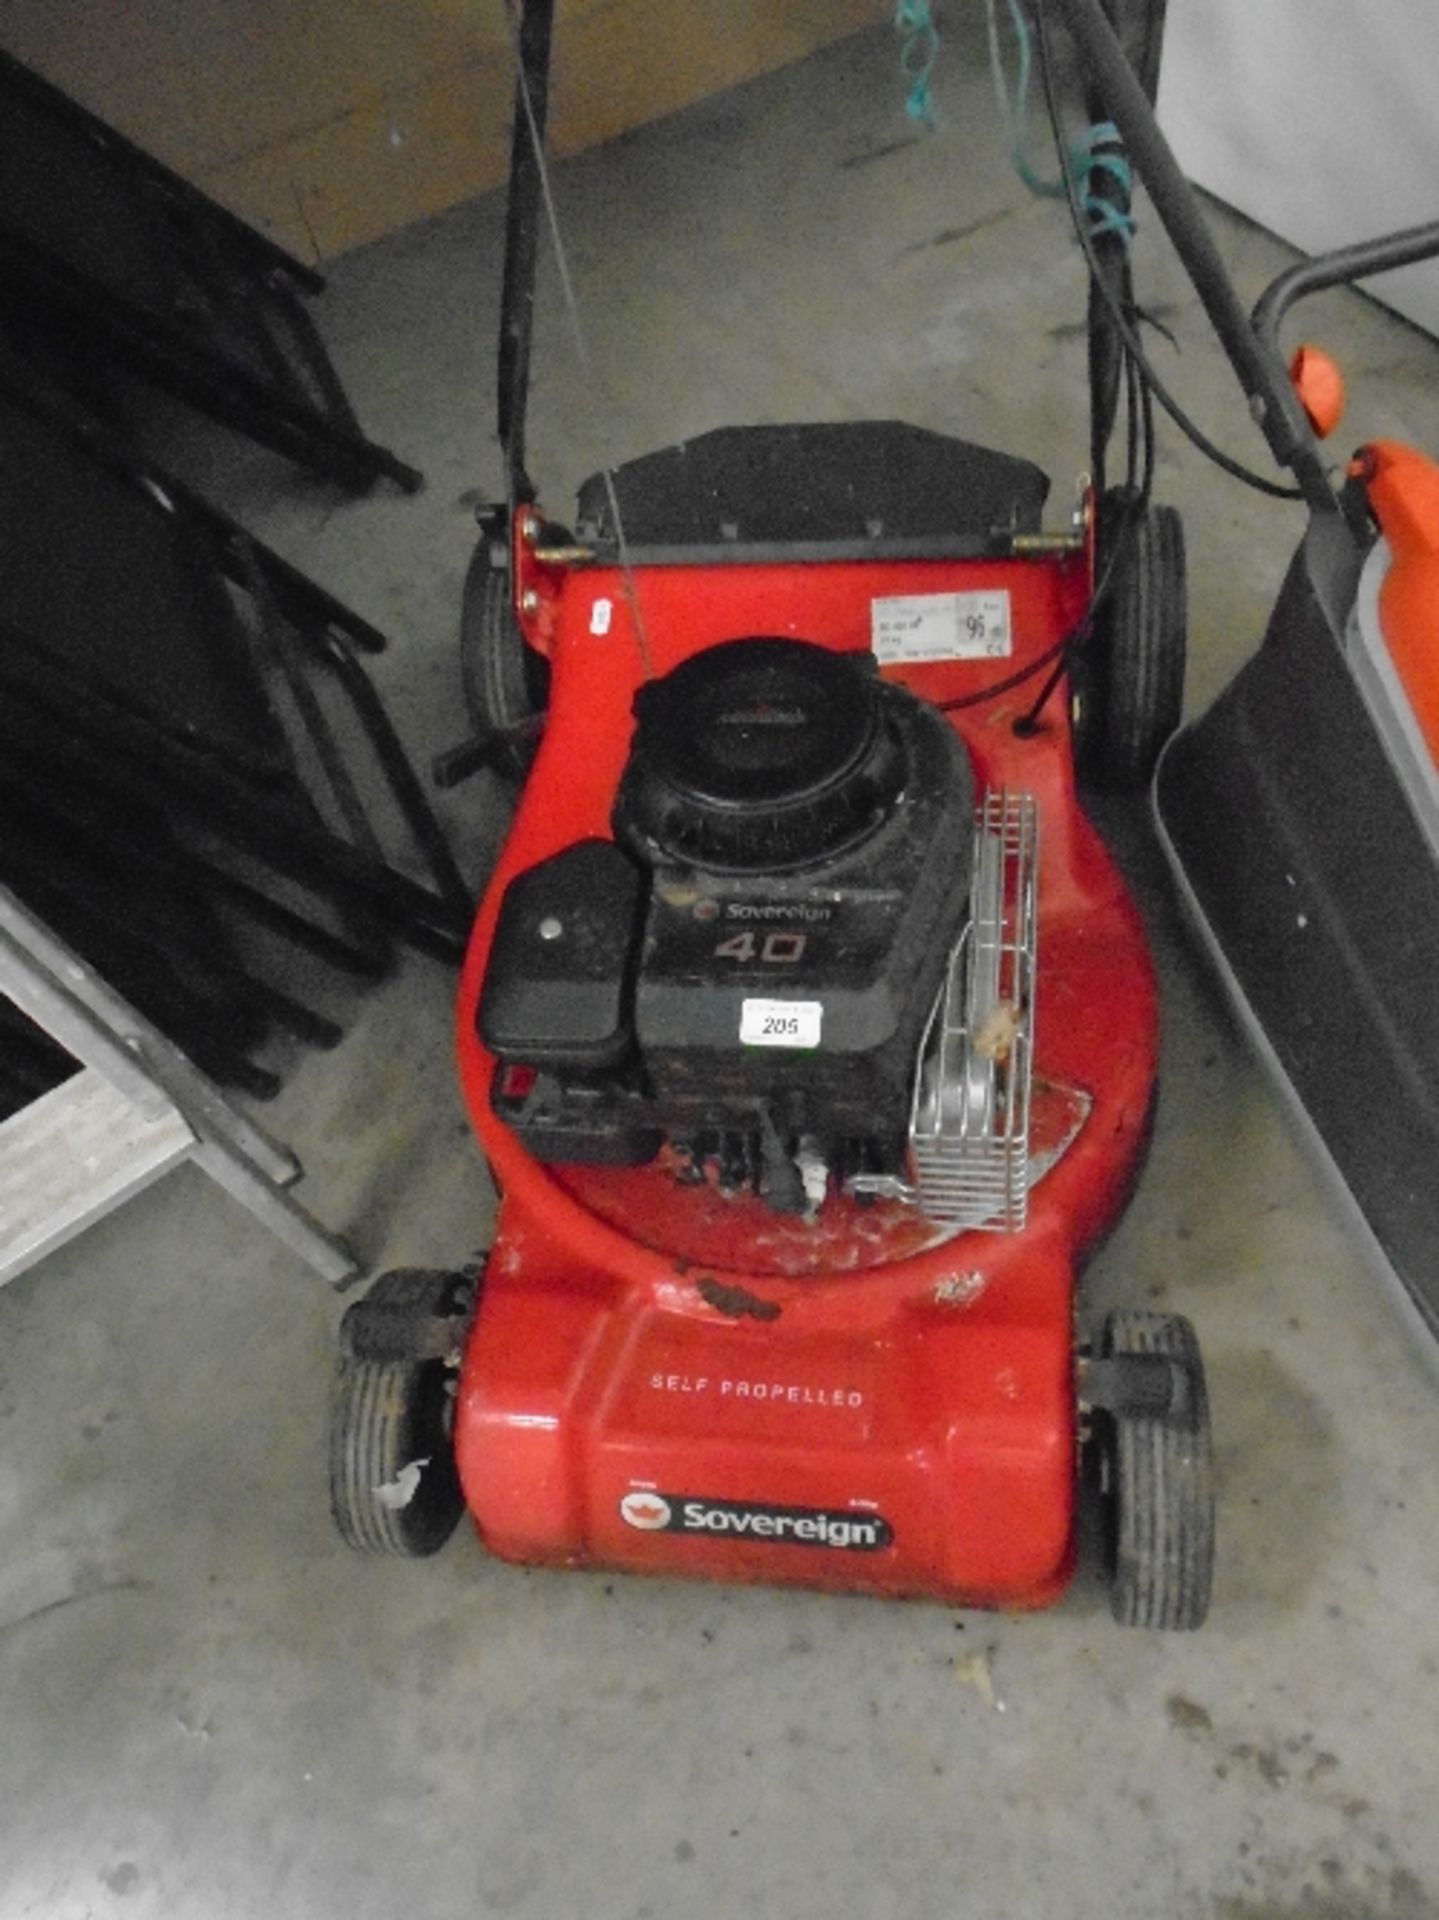 A Sovereign 40 self propelled petrol rotary lawnmower